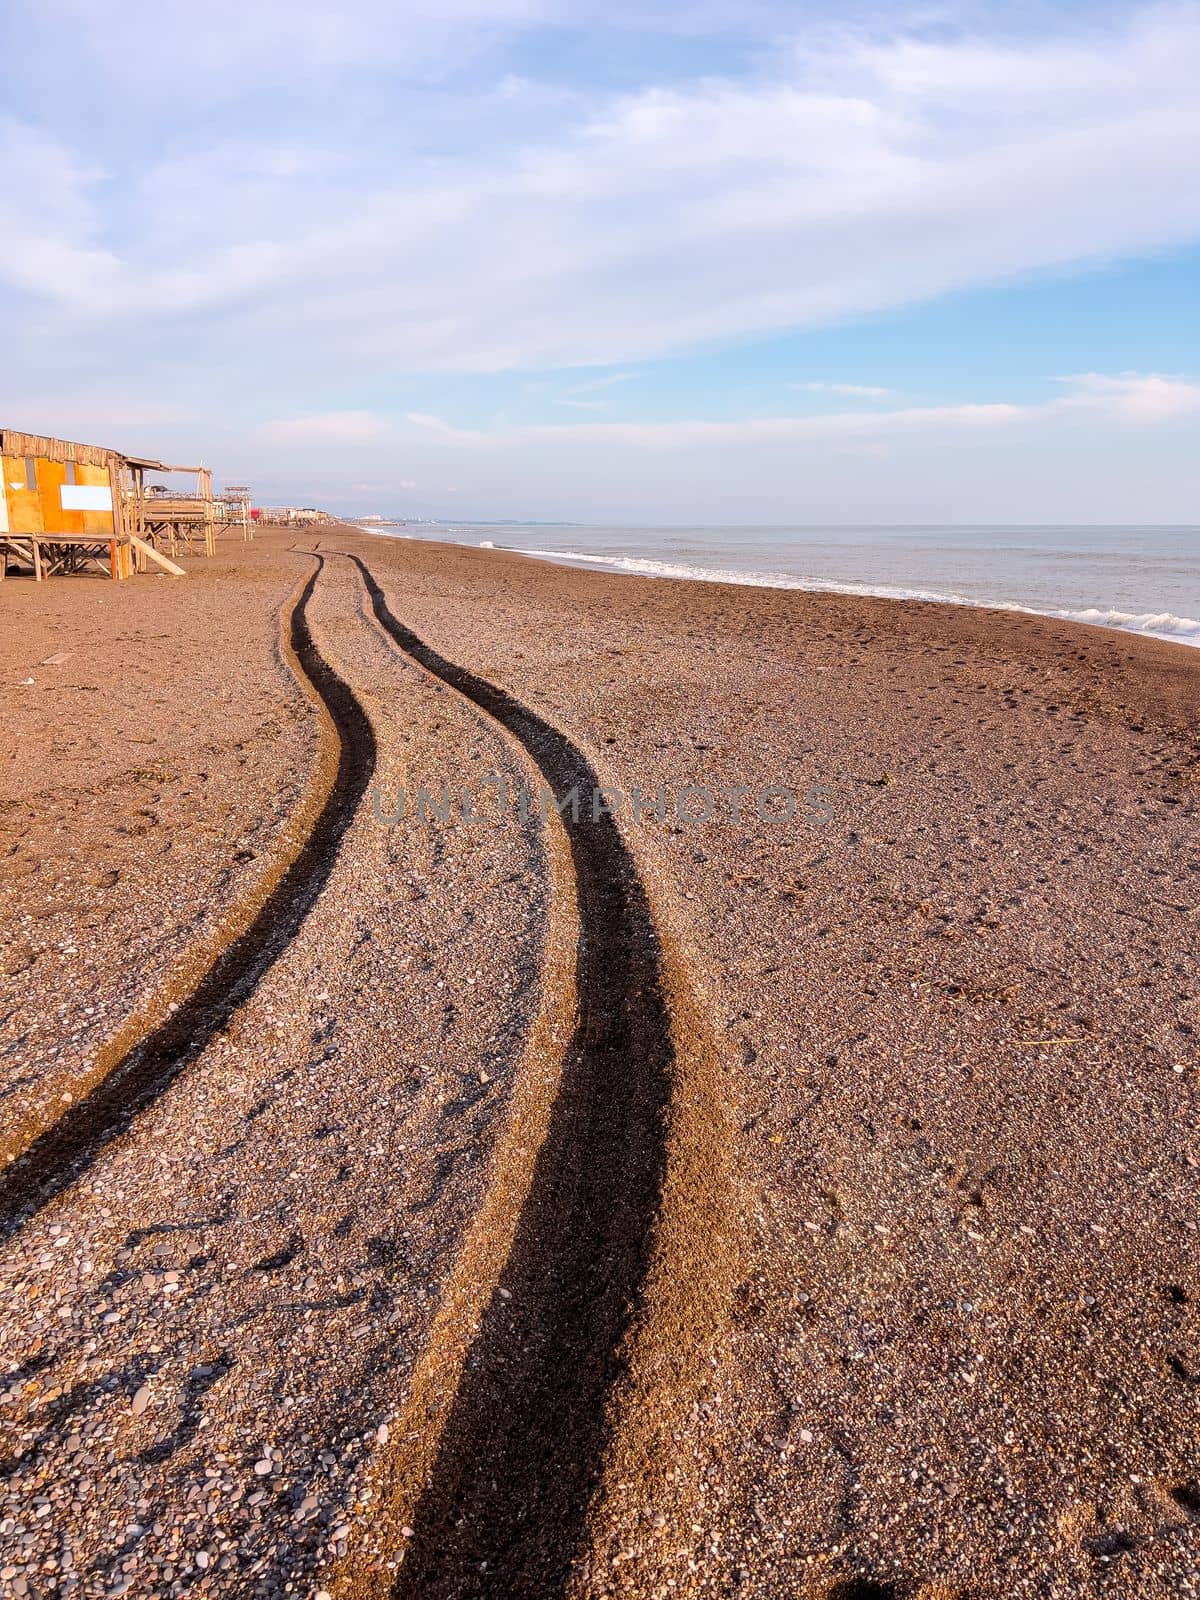 Wheel track of a 4x4 vehicle driving past the beach at sunset by Sonat